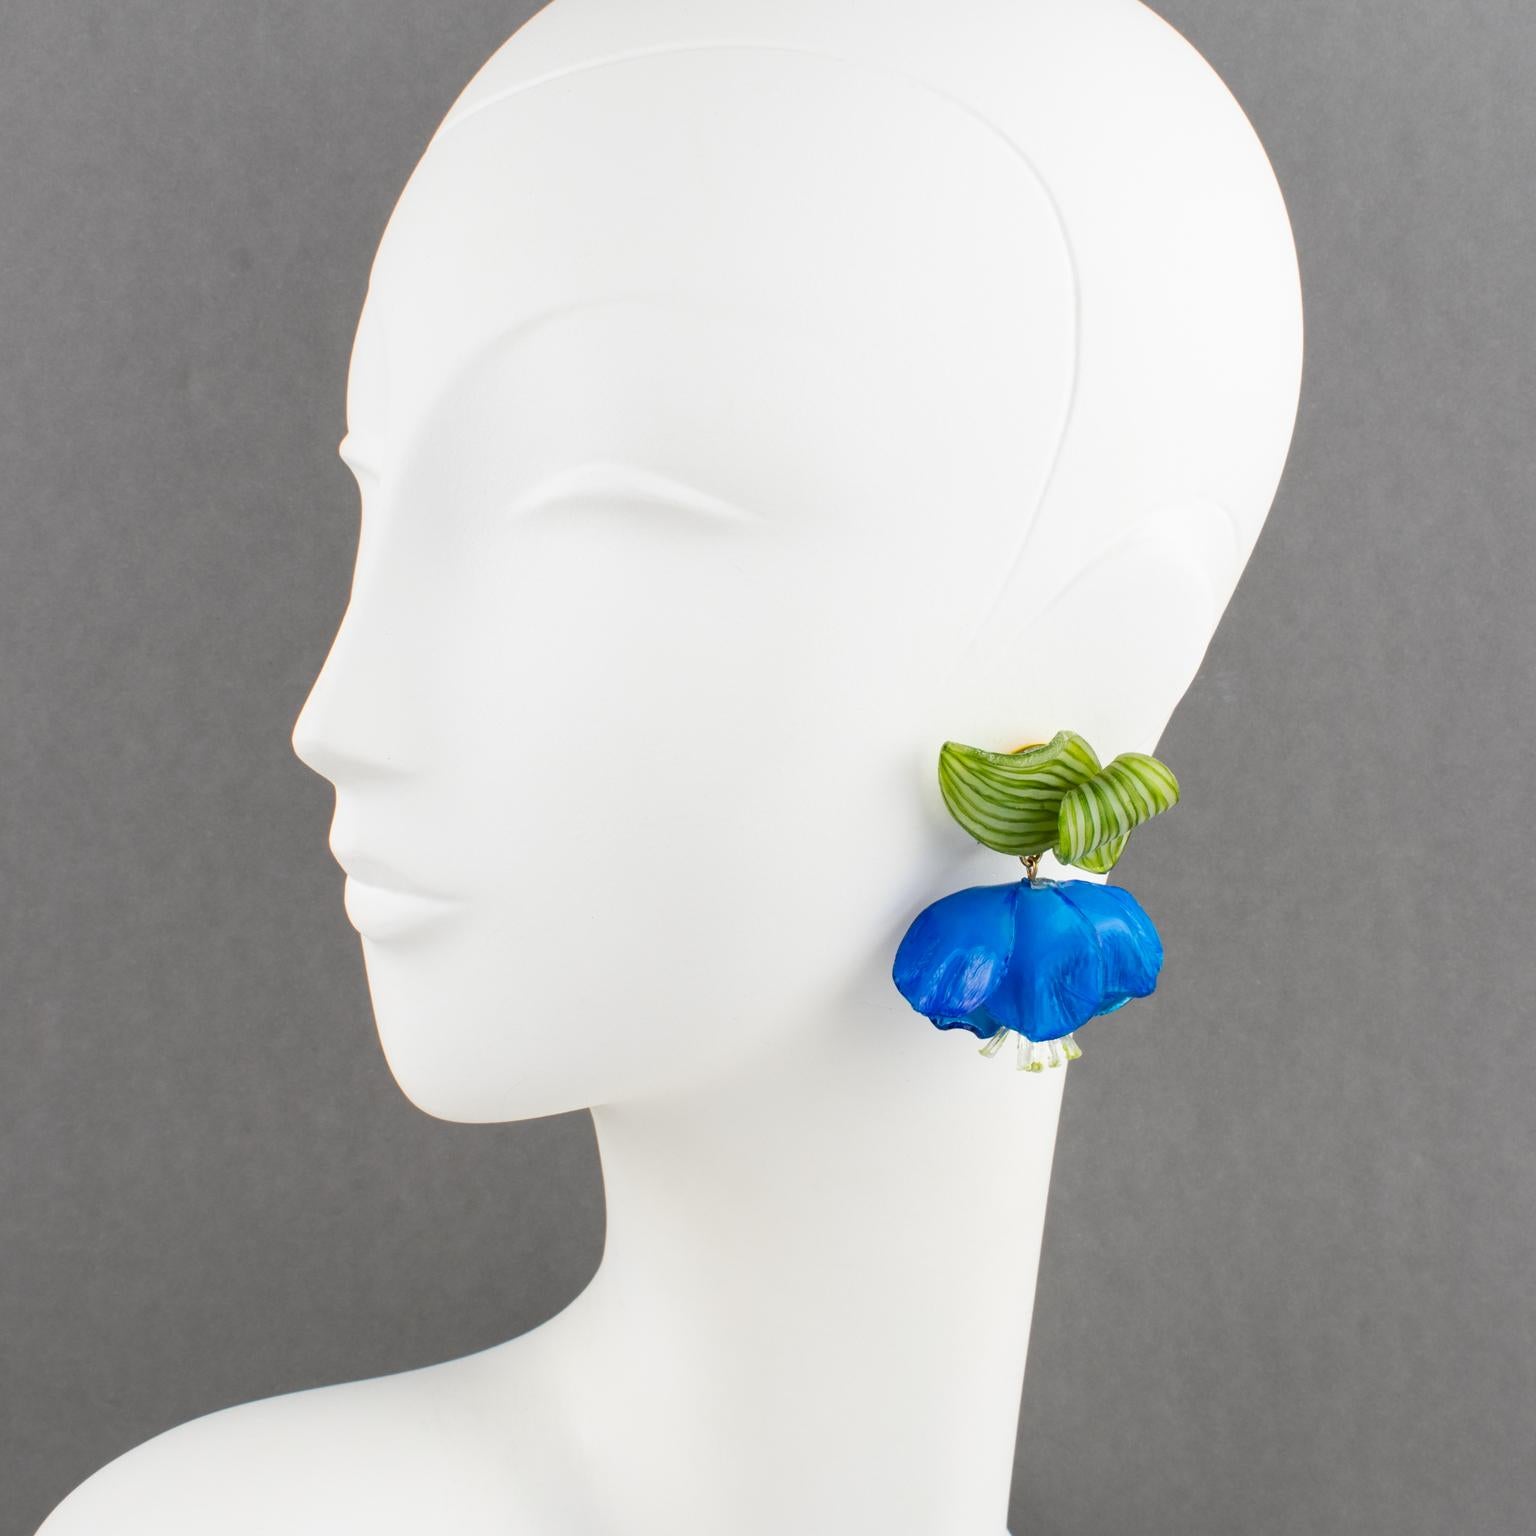 Beautiful resin clip-on earrings designed by Cilea Paris for French jewelry designer Francoise Montague. Dangle shape featuring dimensional blue poppy flowers with green leaves. No visible signature like all the vintage Francoise Montague resin